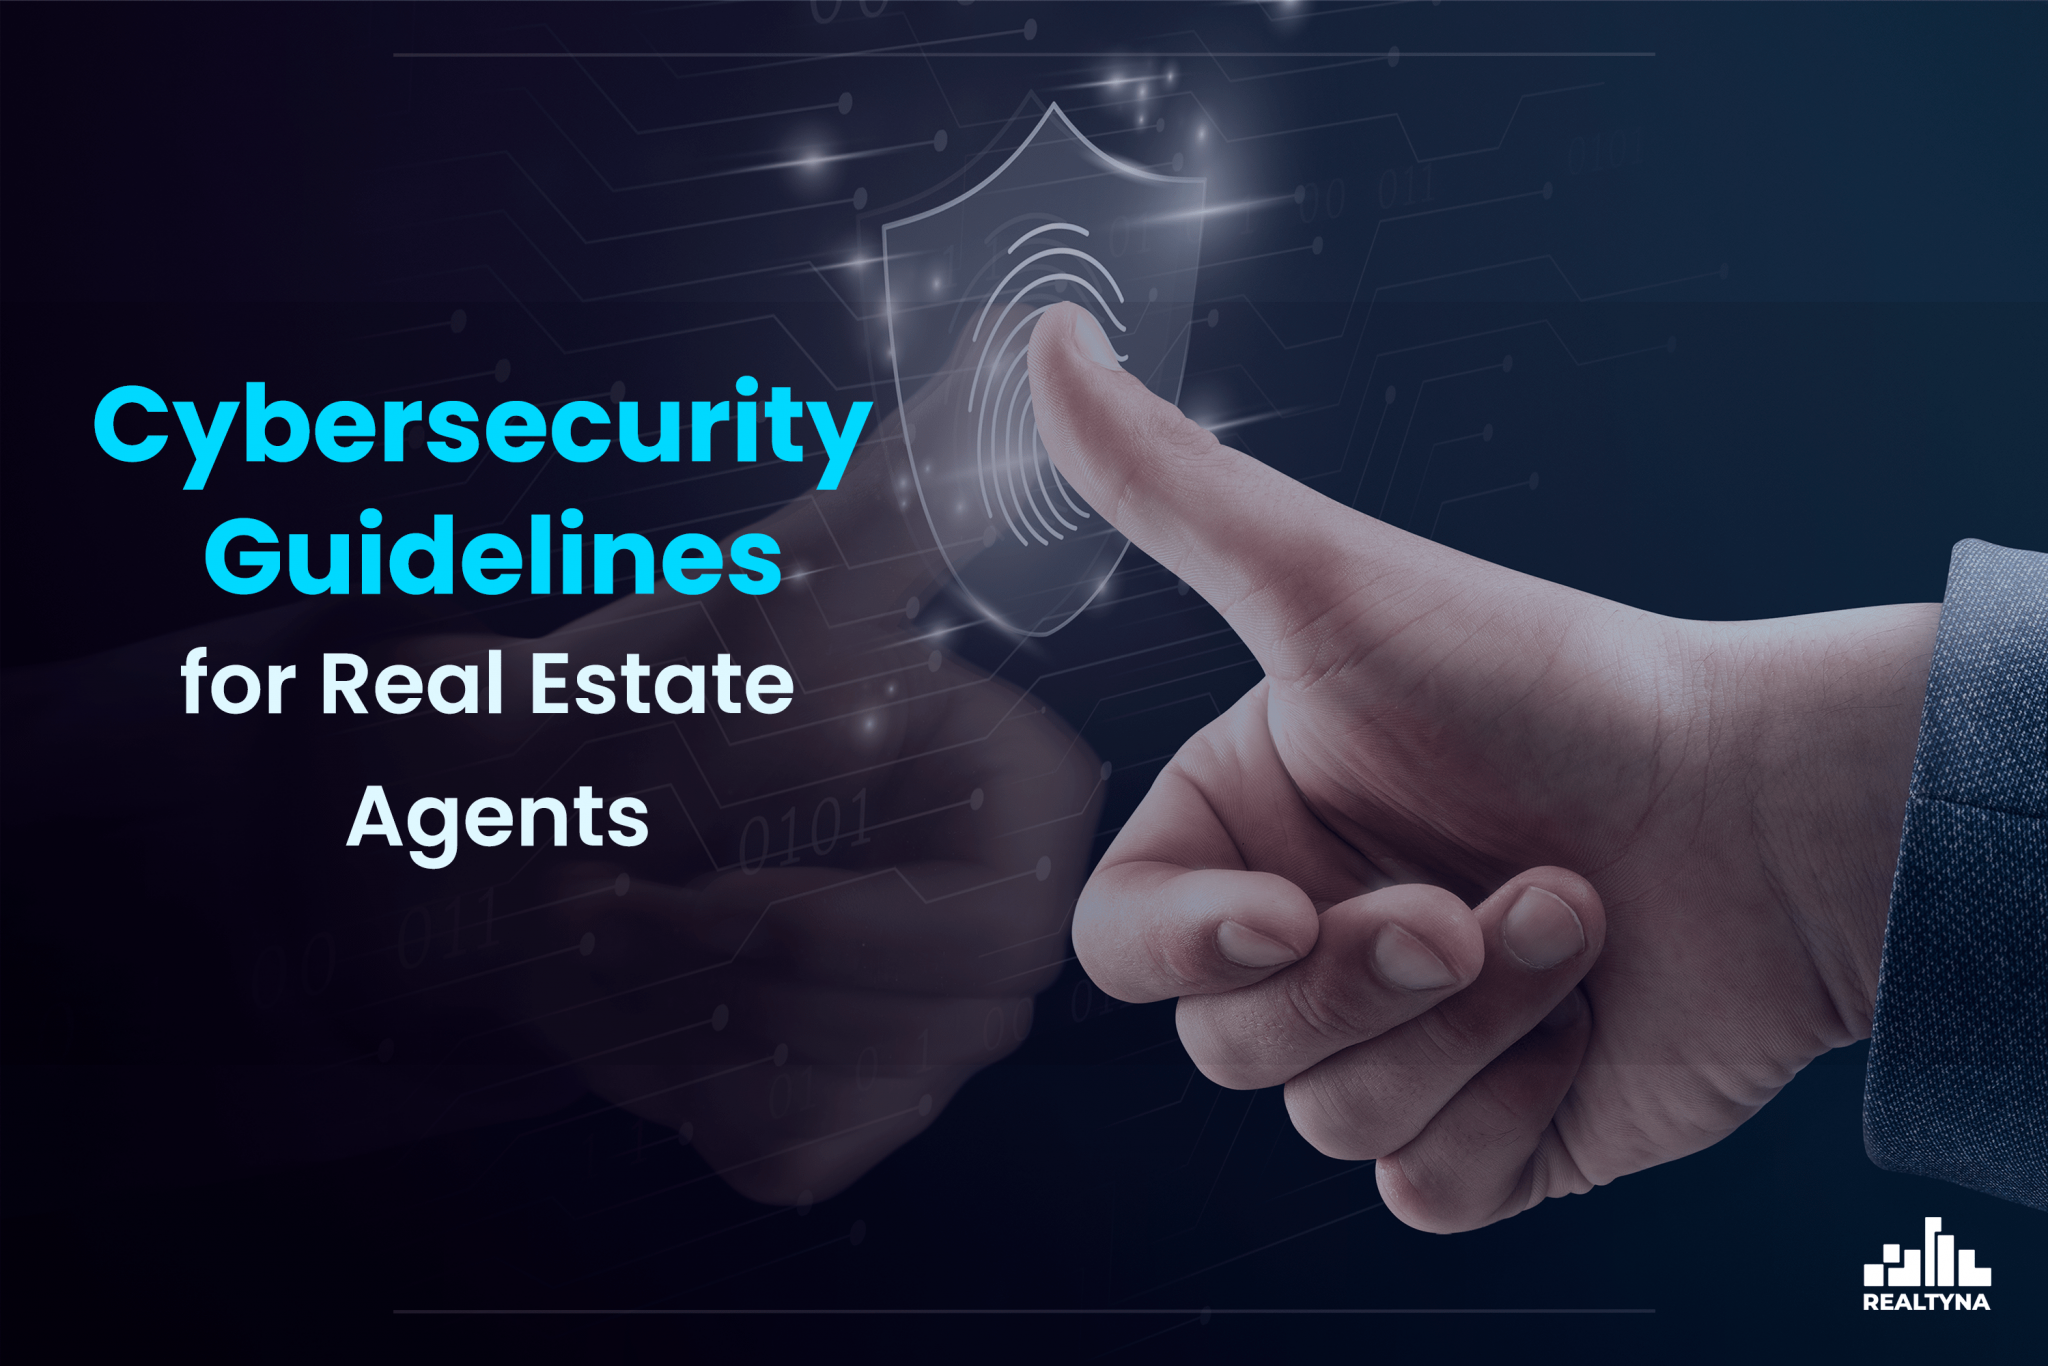 Cybersecurity-Guidelines-For-Real-Estate-Agents.png